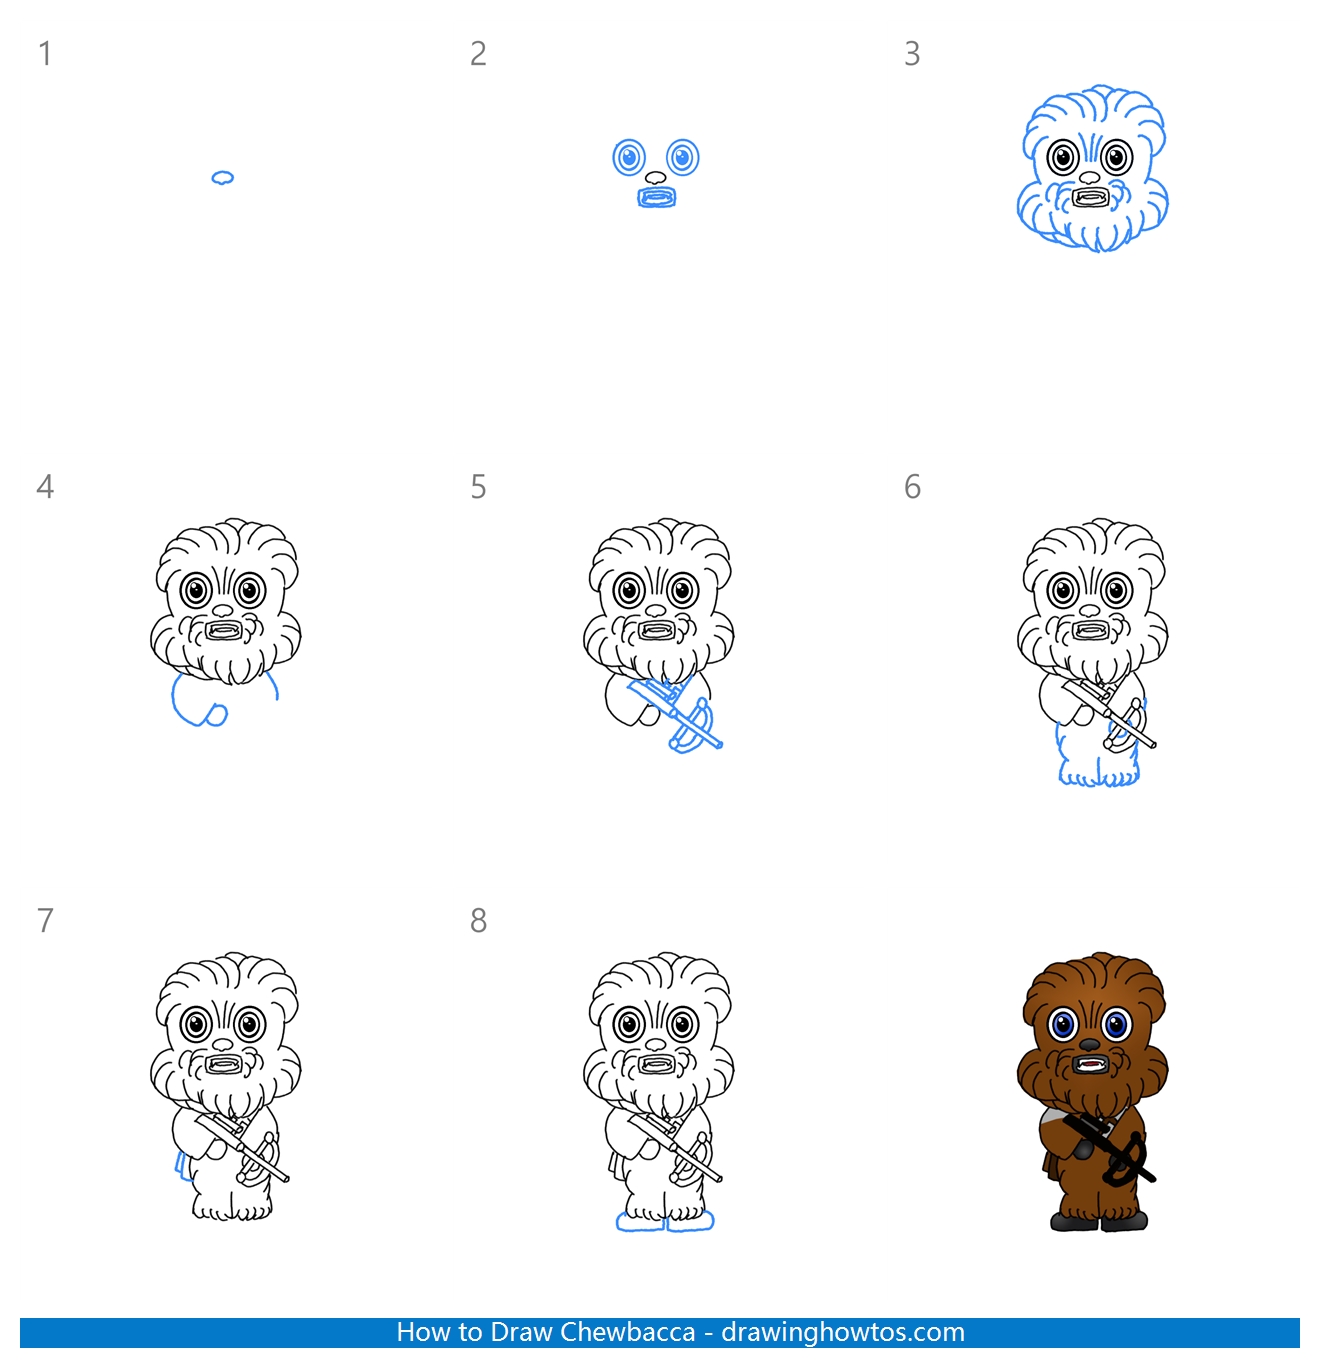 How to Draw Chewbacca Step by Step